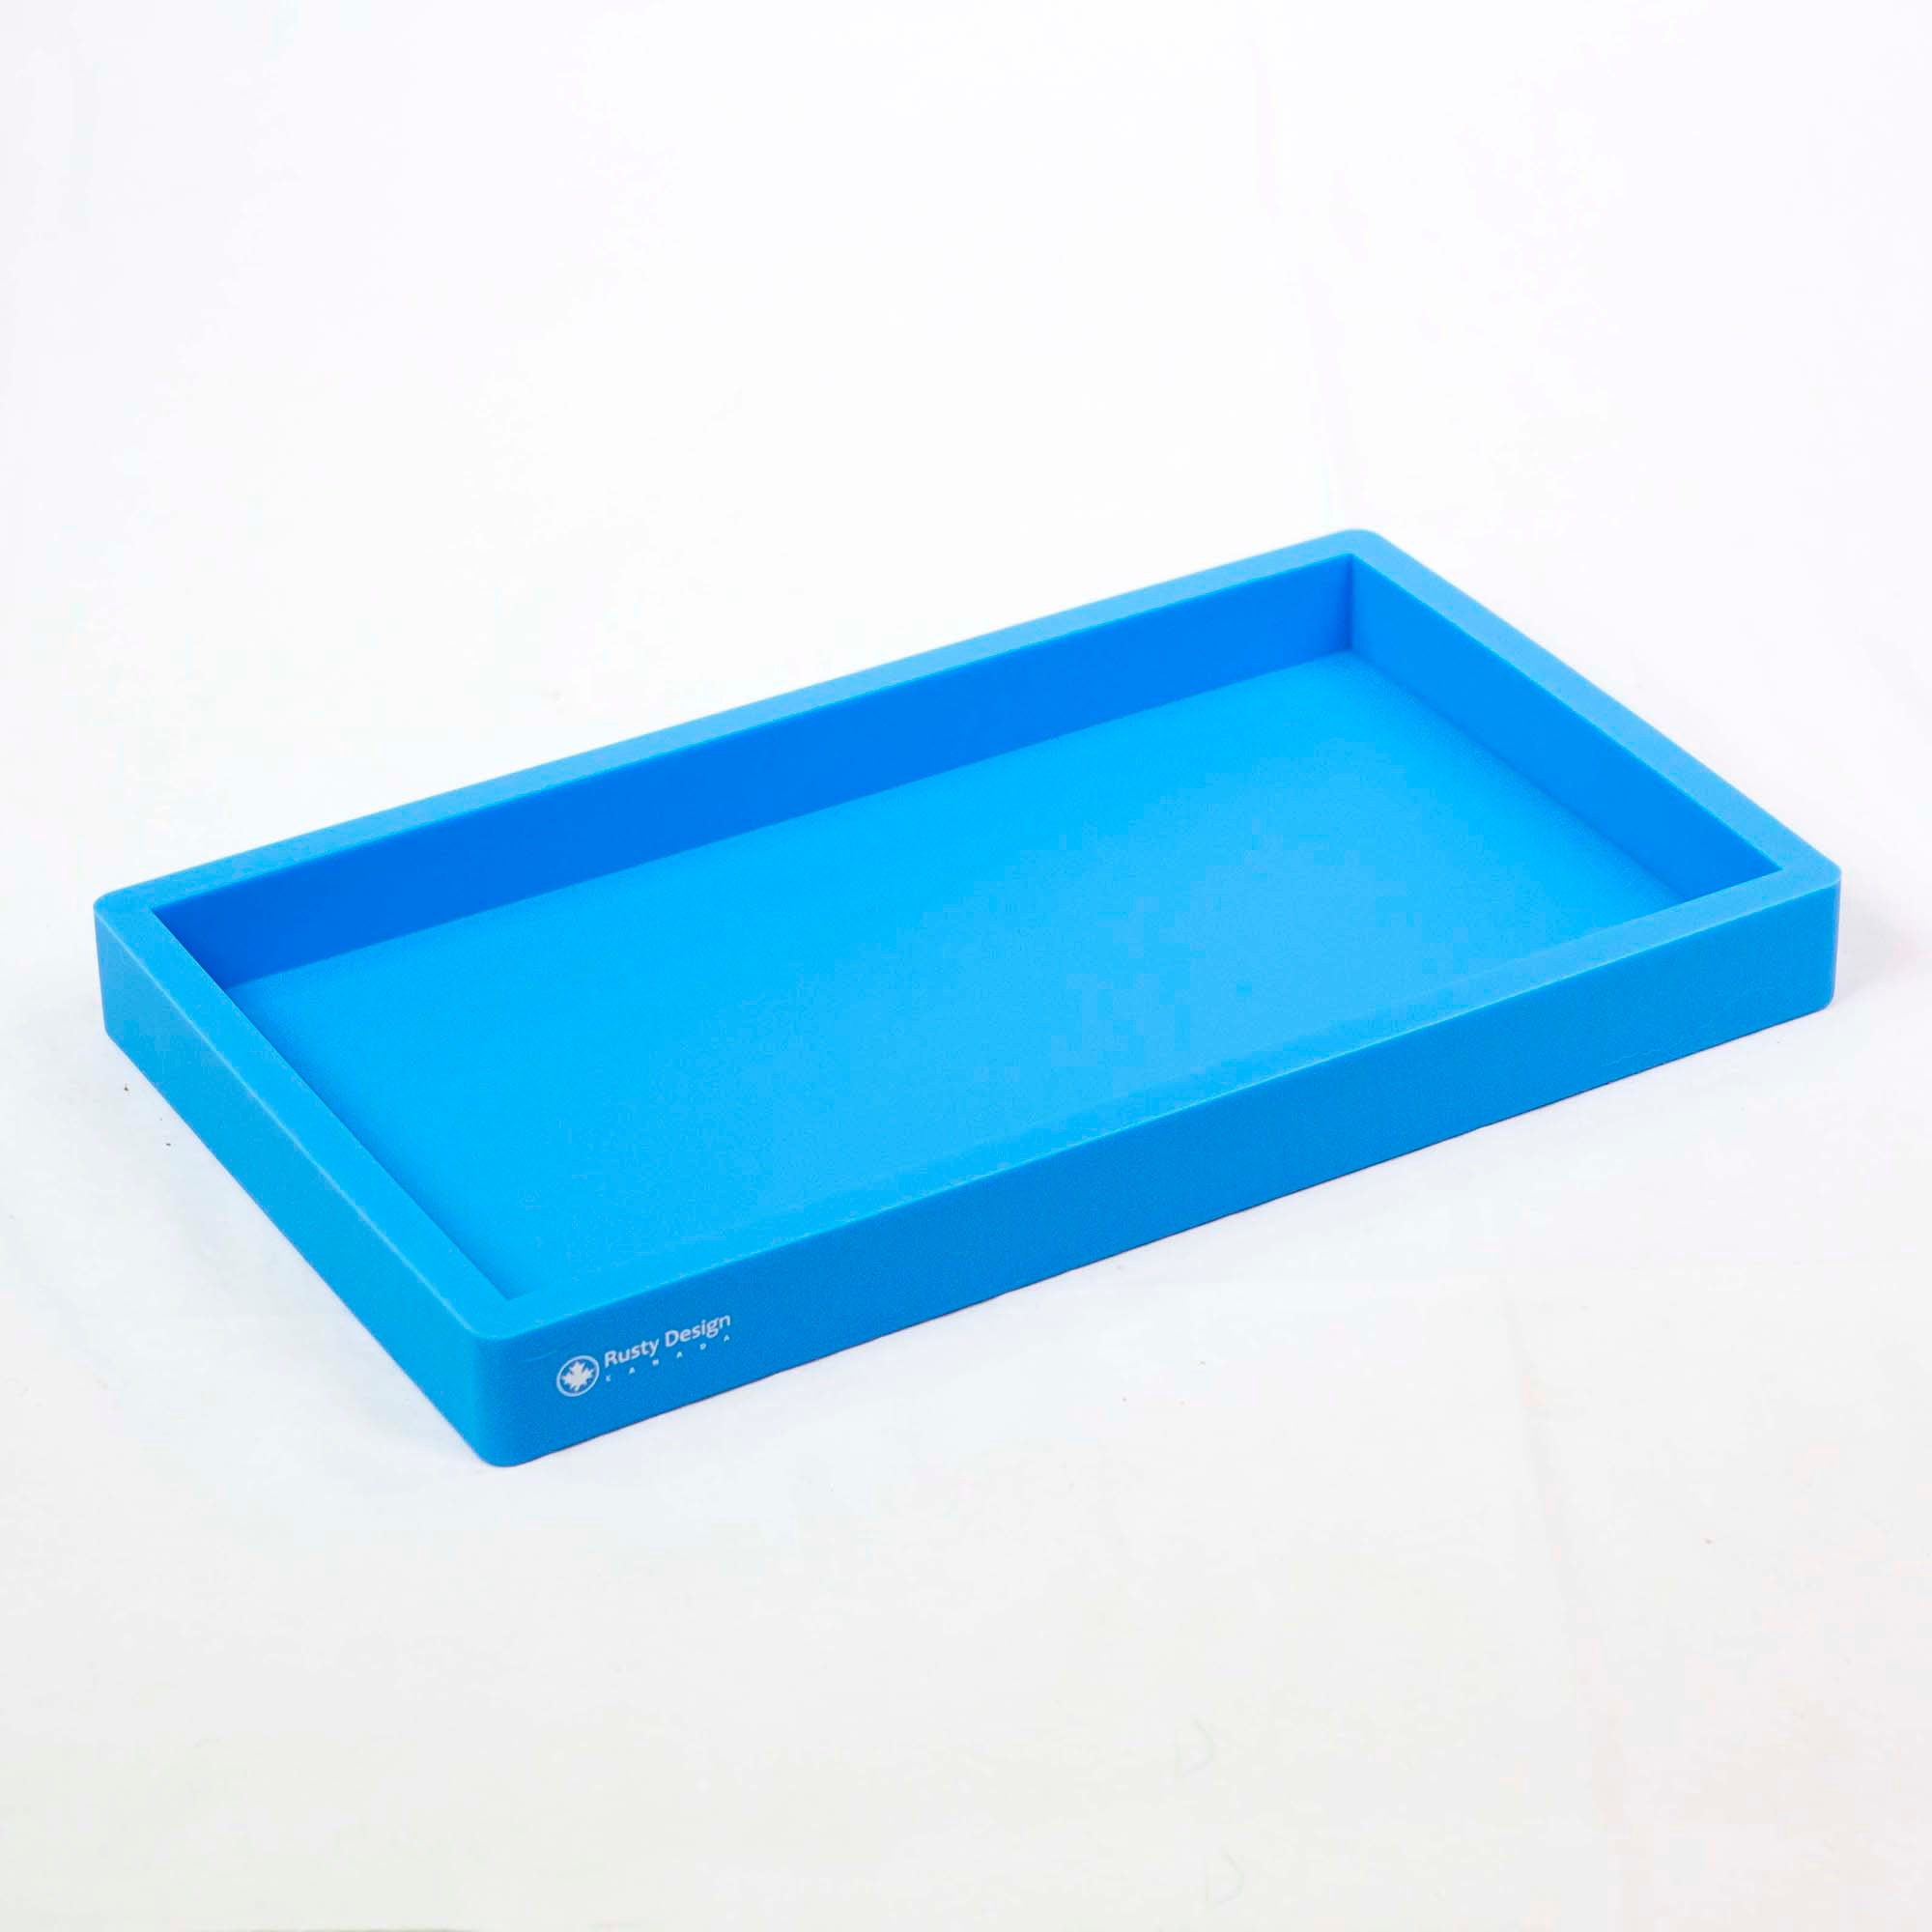  LET'S RESIN Silicone Resin Tray Molds, Epoxy Resin Molds for  Rectangle Cutting Board, Large Silicone Molds for Resin Serving Tray, Resin  Casting, Resin Art… : Arts, Crafts & Sewing